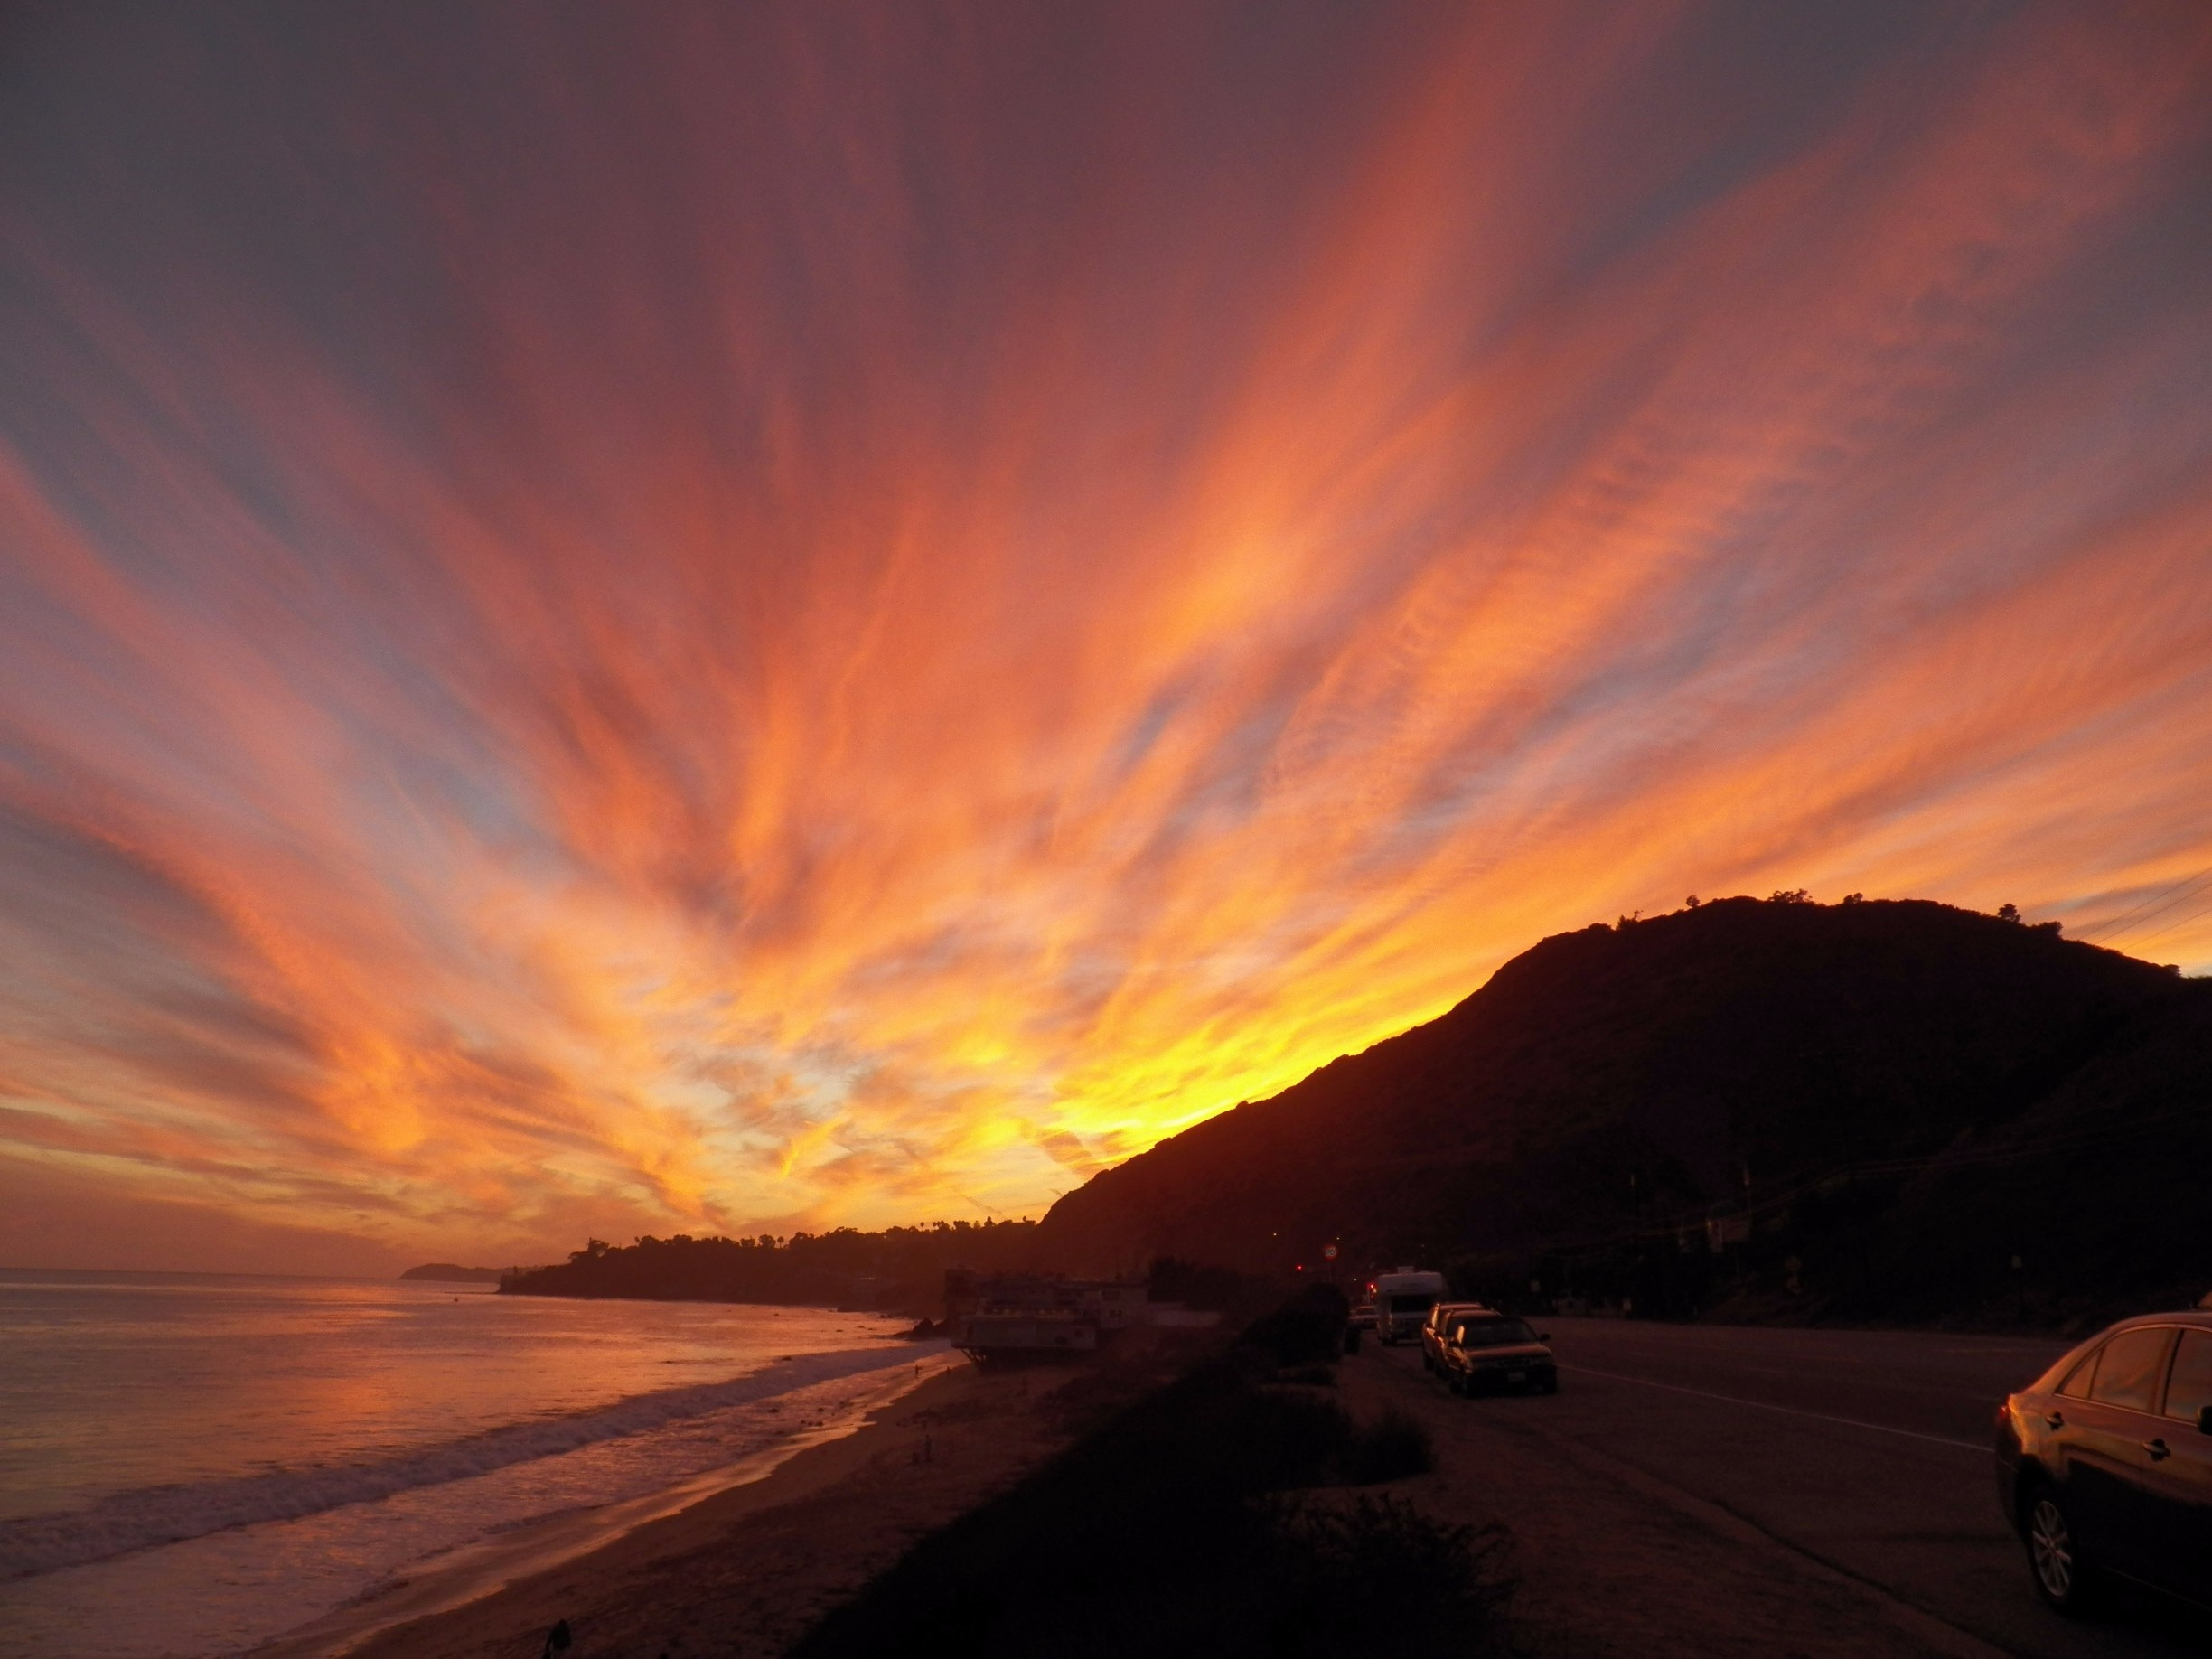 #GoldenHour at Corral Creek Beach in Malibu.
On this evening the sky was truly spectacular, the photo is unedited and doesn't have any filters, but standing there watching this was mesmerizing. 
It must be the way the Malibu coastline curves and the light hits it differently than other beaches along LA. For moments of serenity or romance head out to Malibu :) 